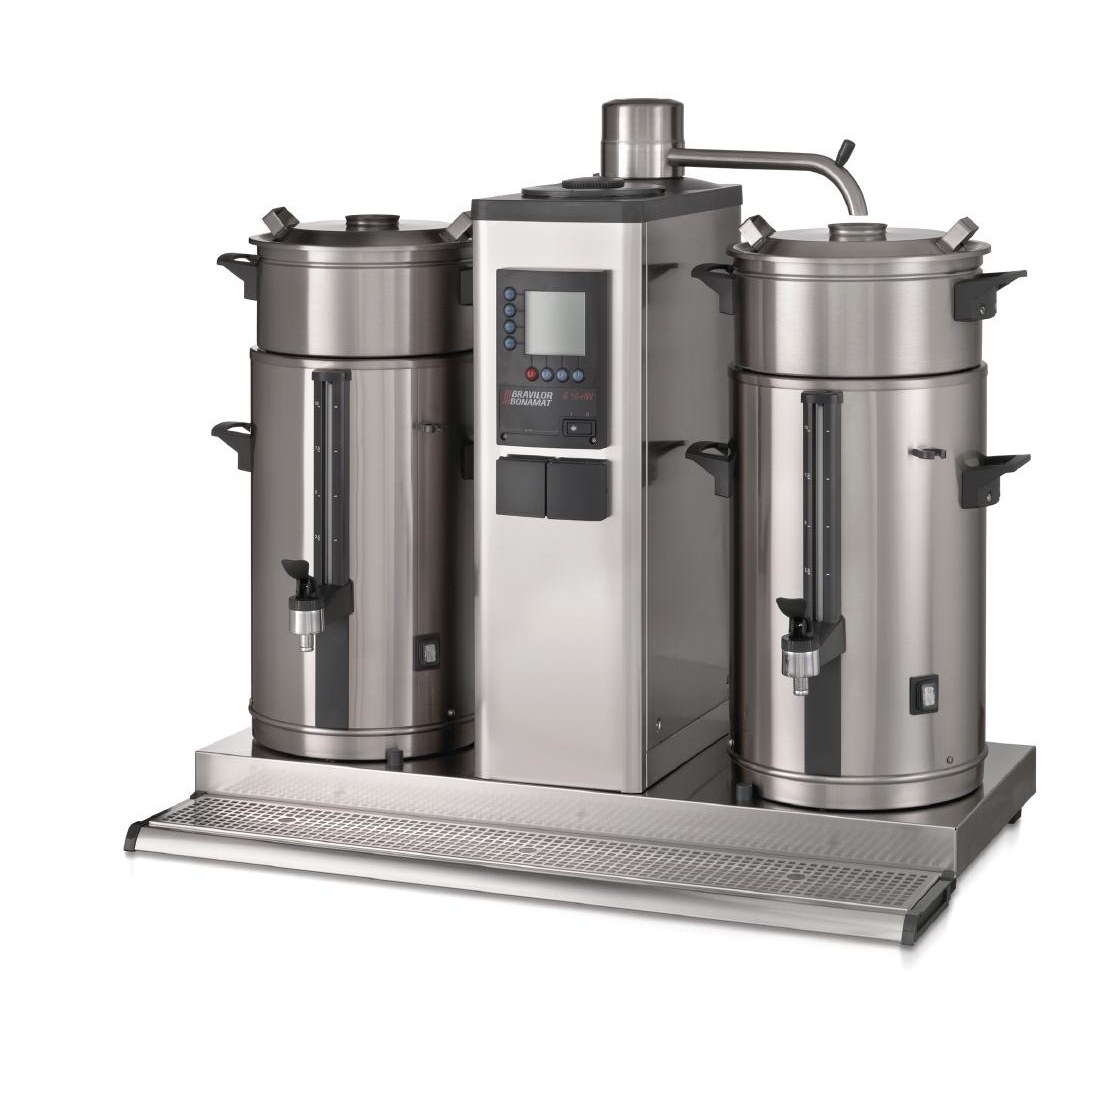 Bravilor B20 Bulk Coffee Brewer with 2x20Ltr Coffee Urns 3 Phase